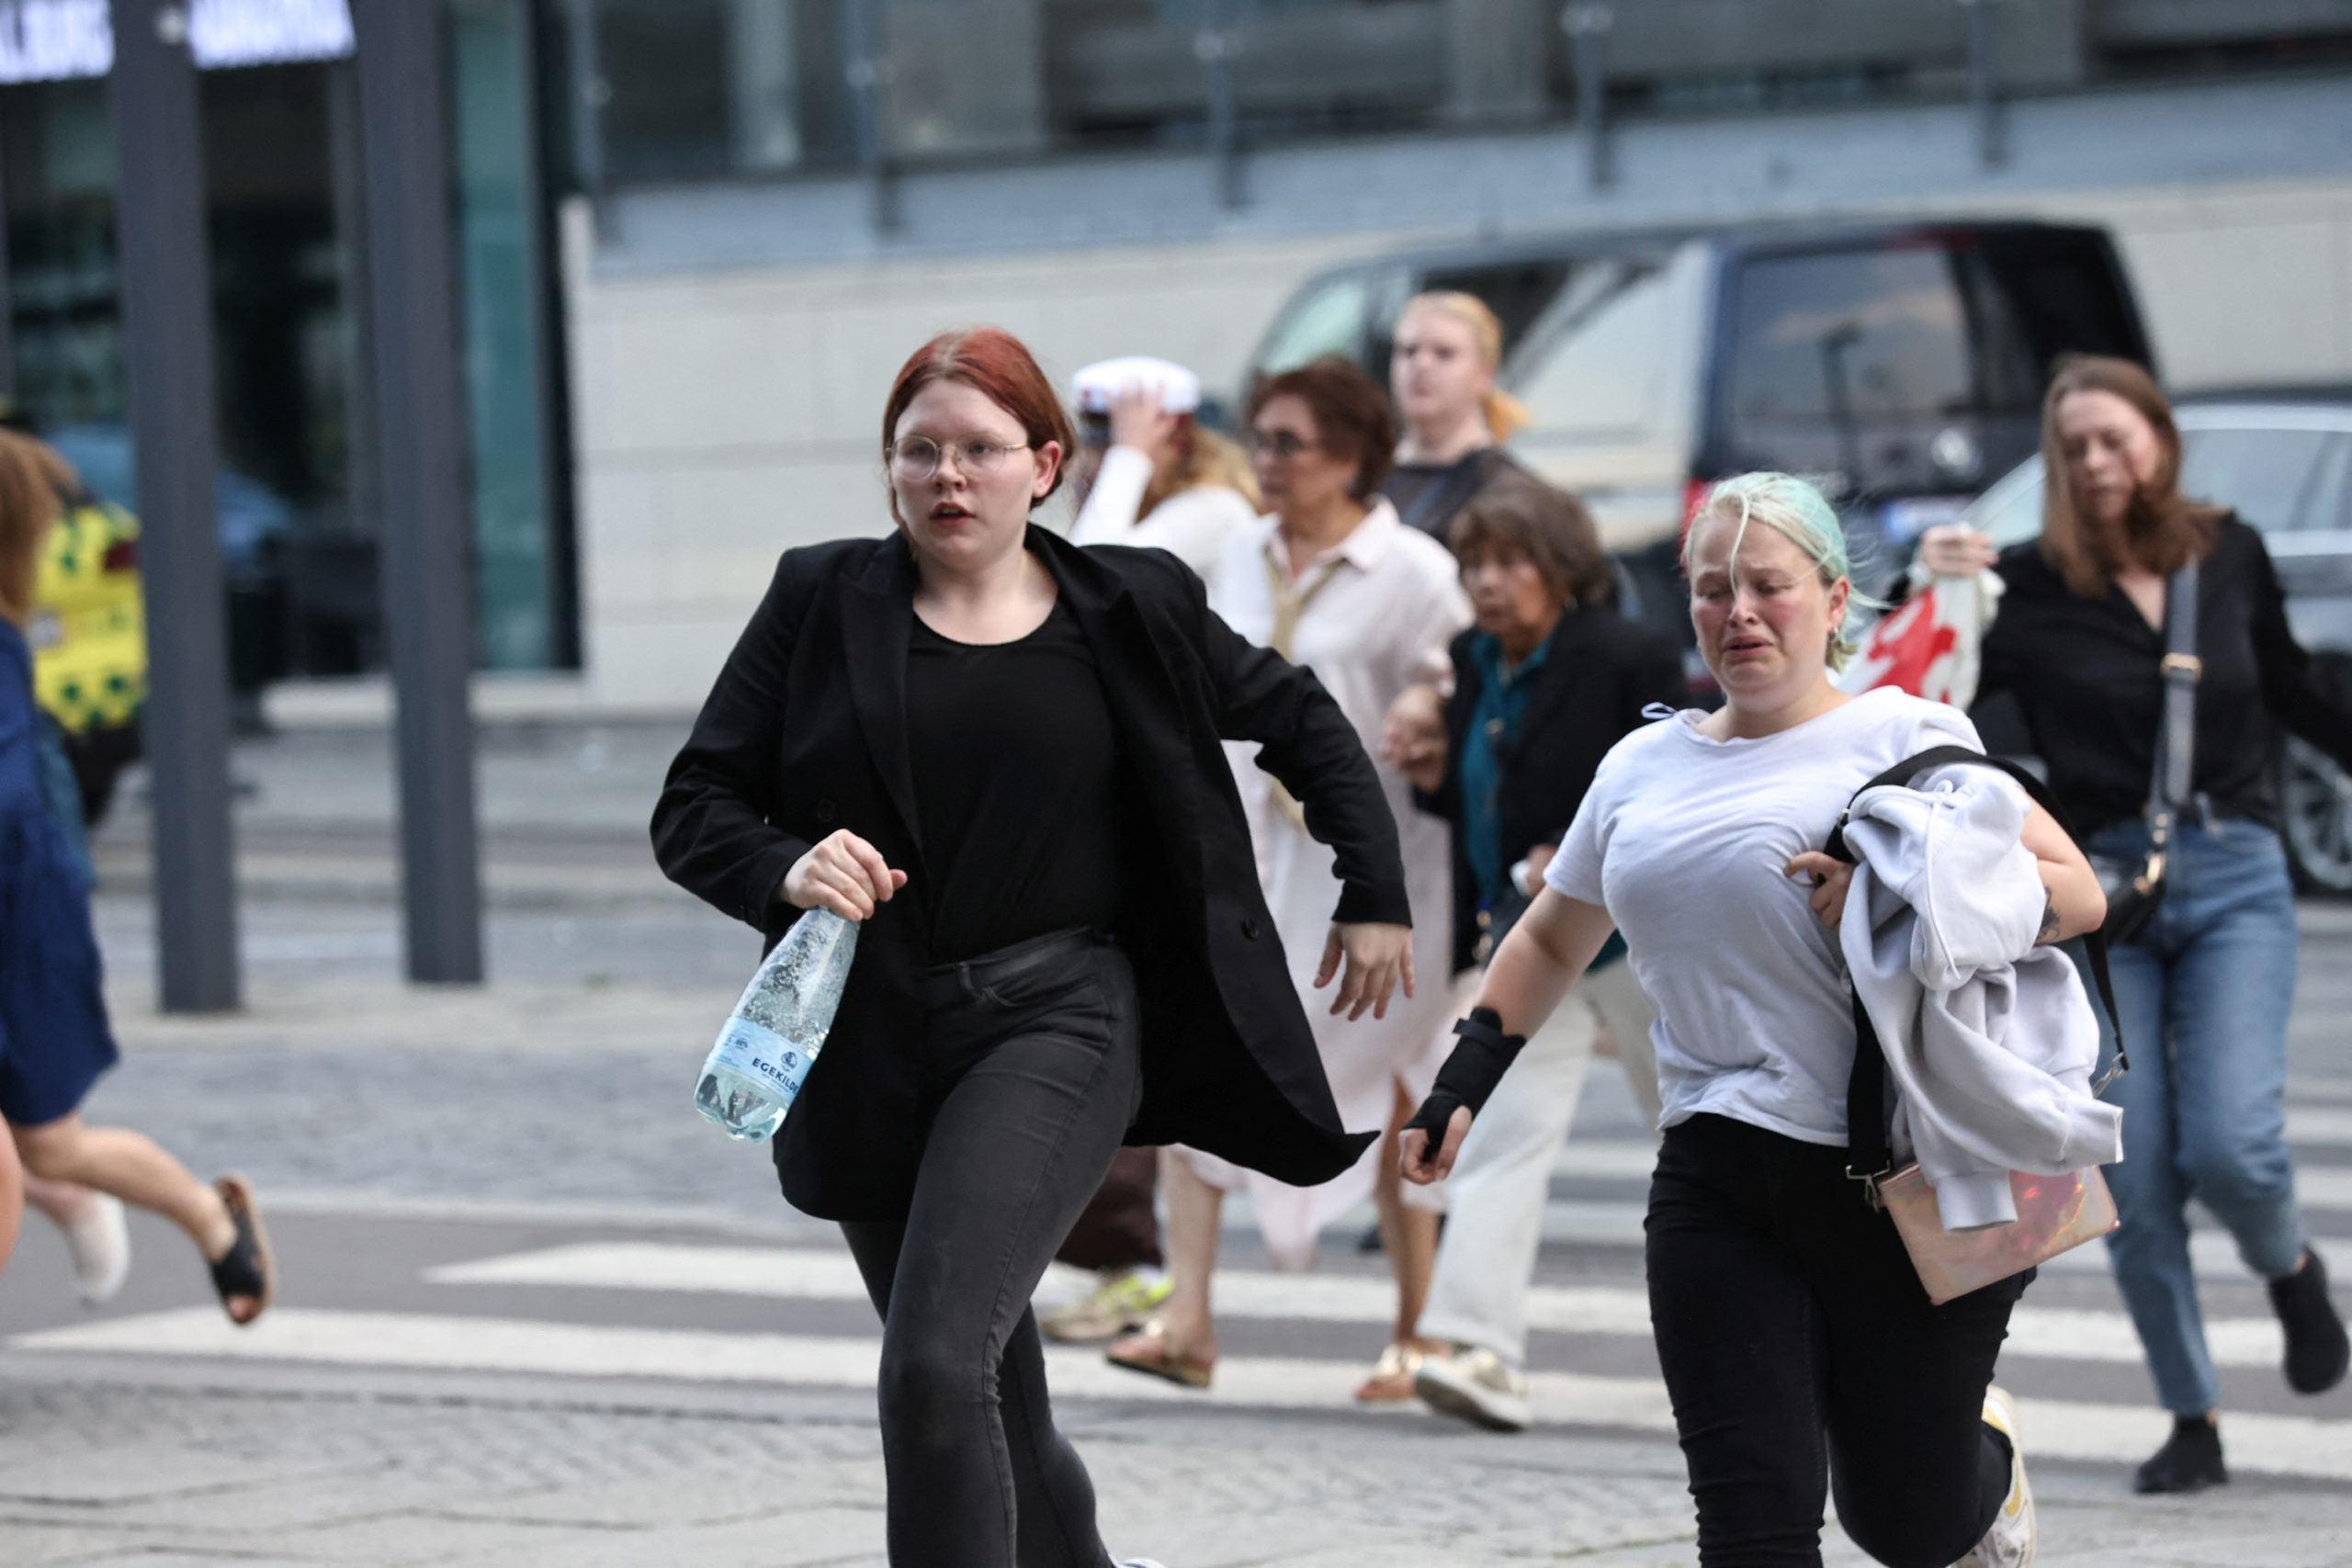 People leave Field's shopping centre, after Danish police said they received reports of shooting, i...